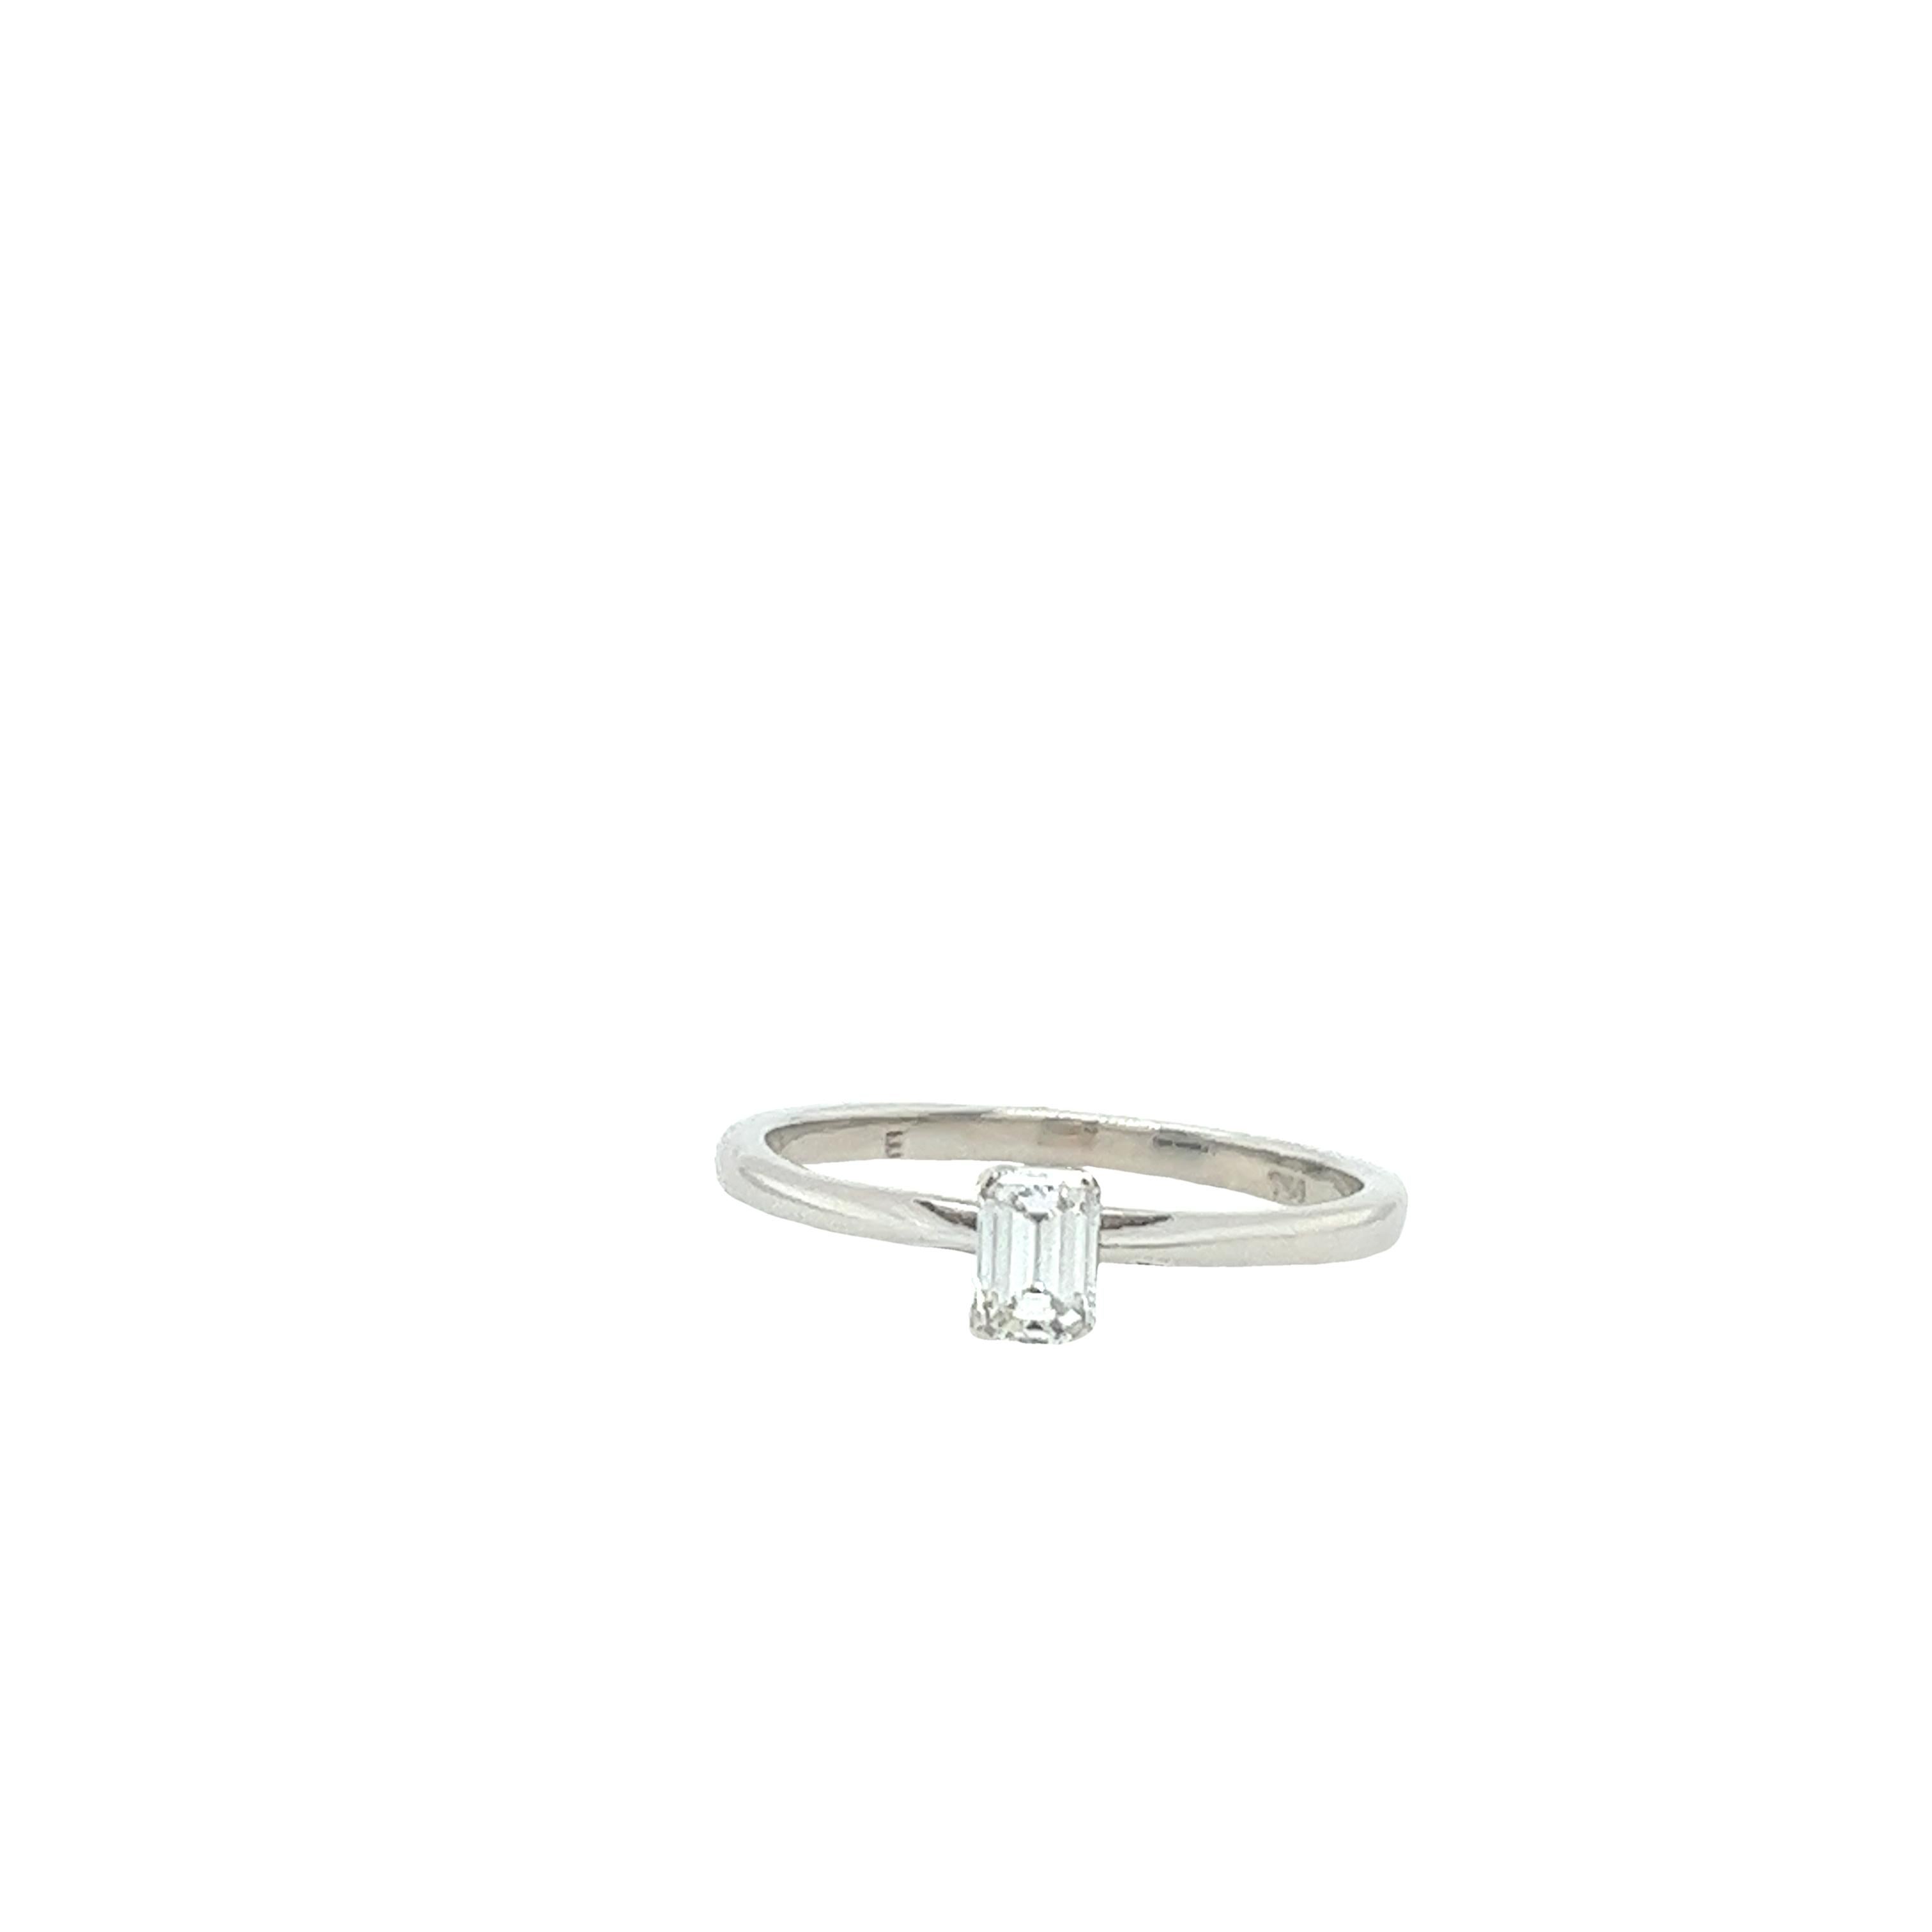 Women's 18ct White Gold Diamond Solitaire Ring Set With 0.20ct F-VS1 Emerald cut Diamond For Sale